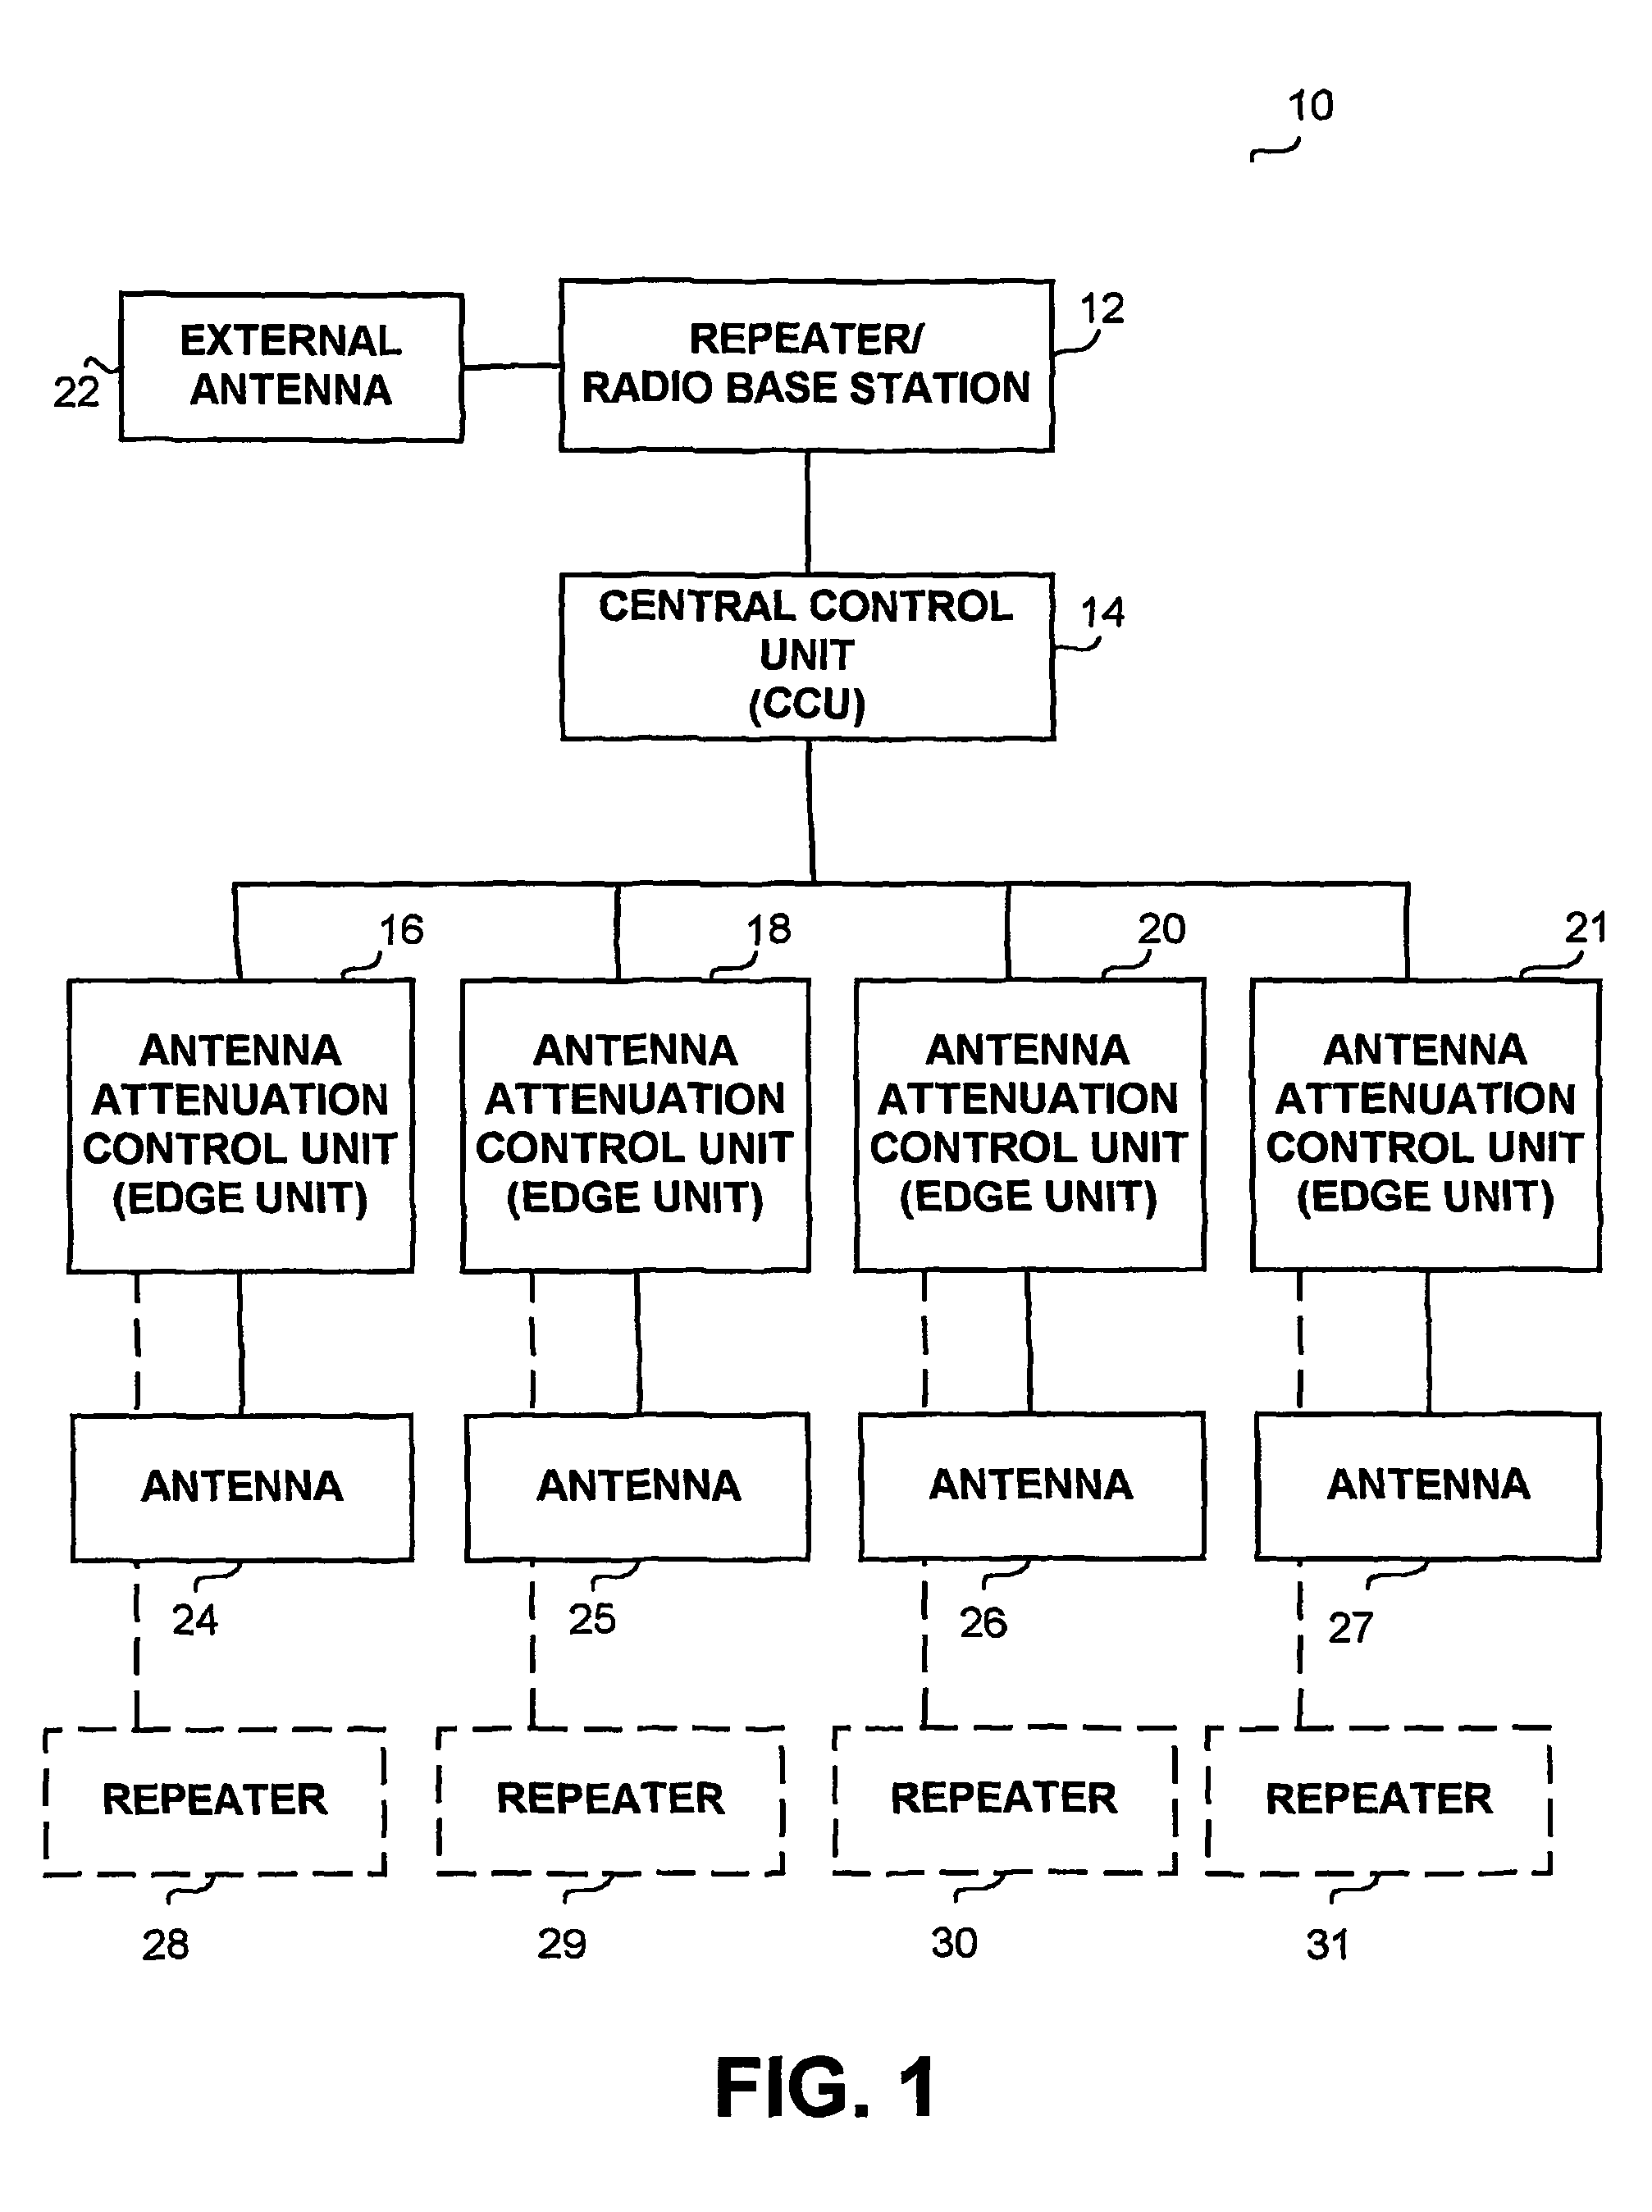 System and method for the reduction of interference in an indoor communications wireless distribution system